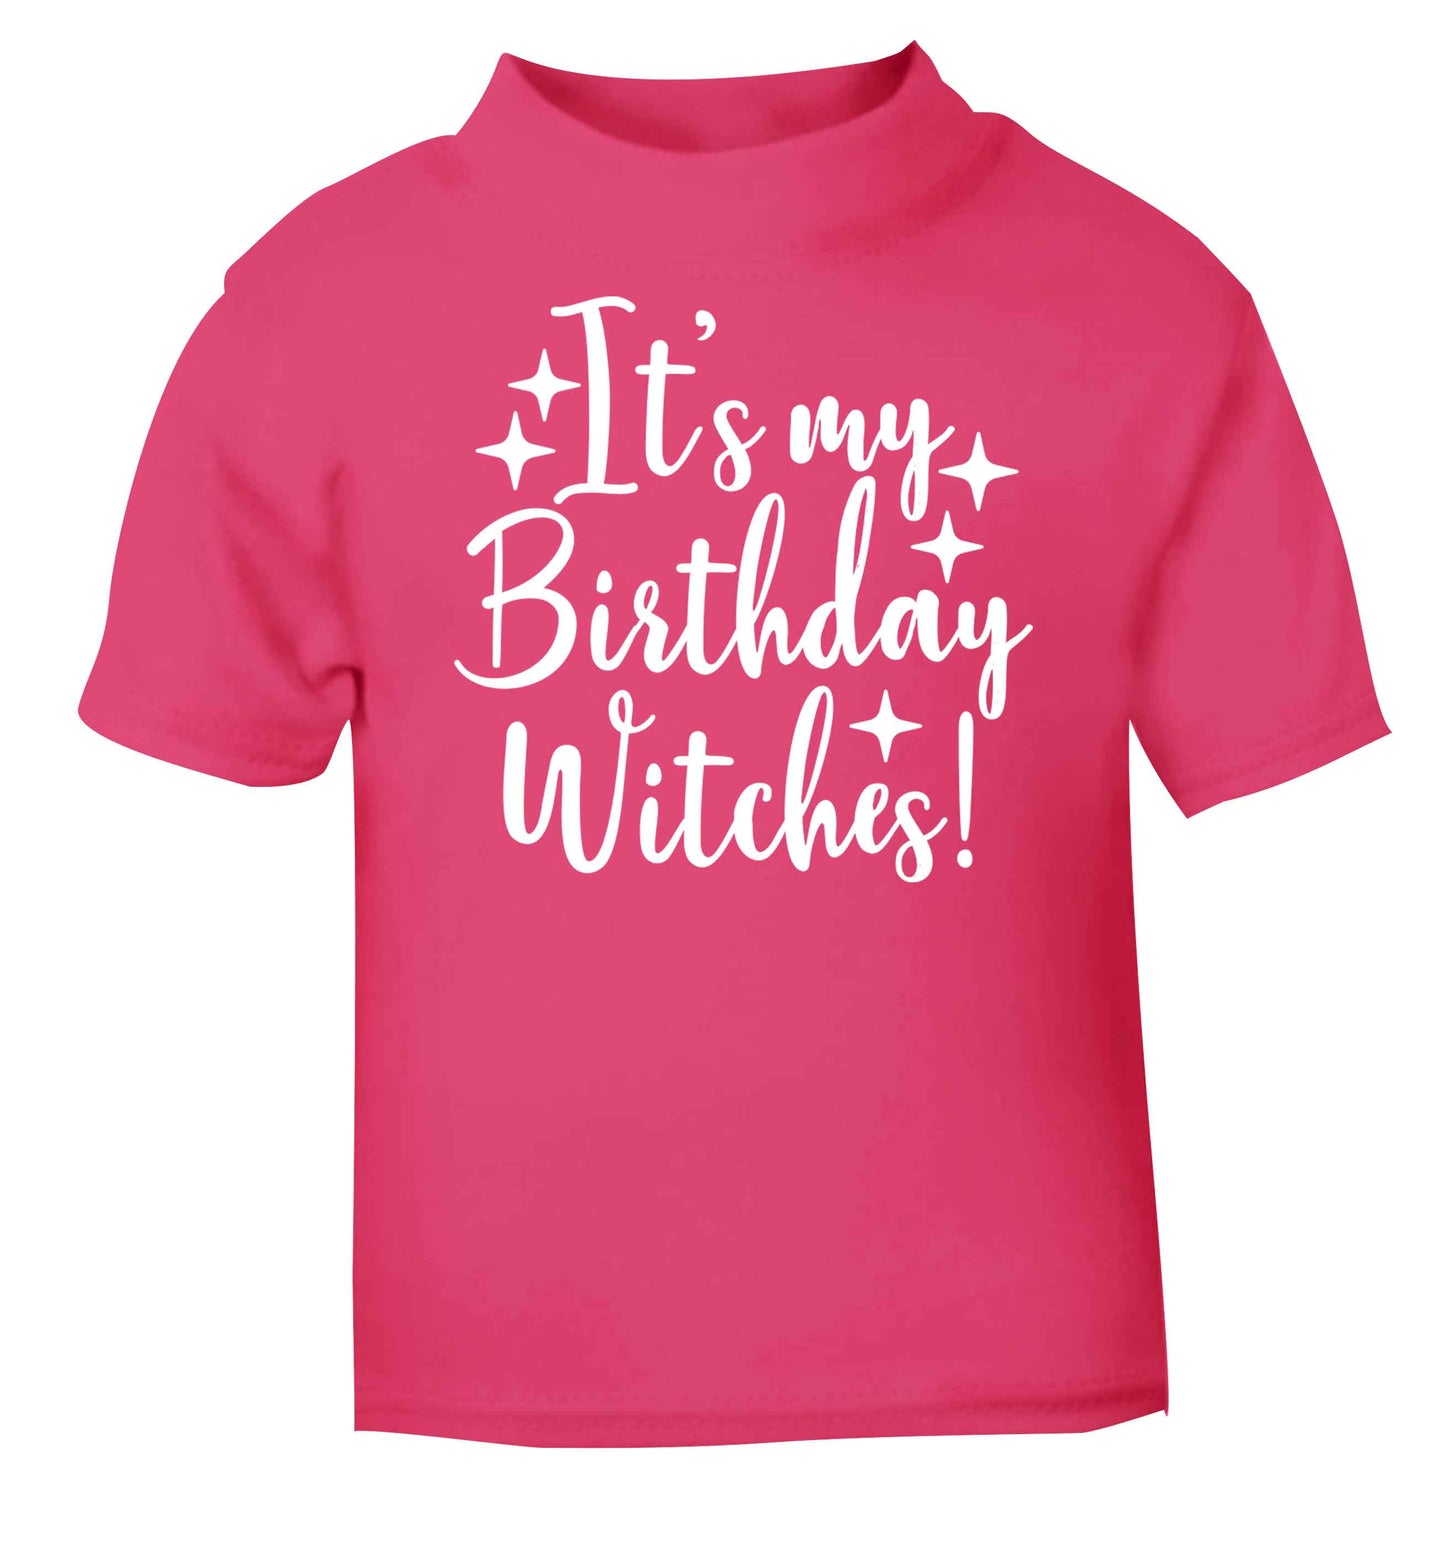 It's my birthday witches!pink baby toddler Tshirt 2 Years